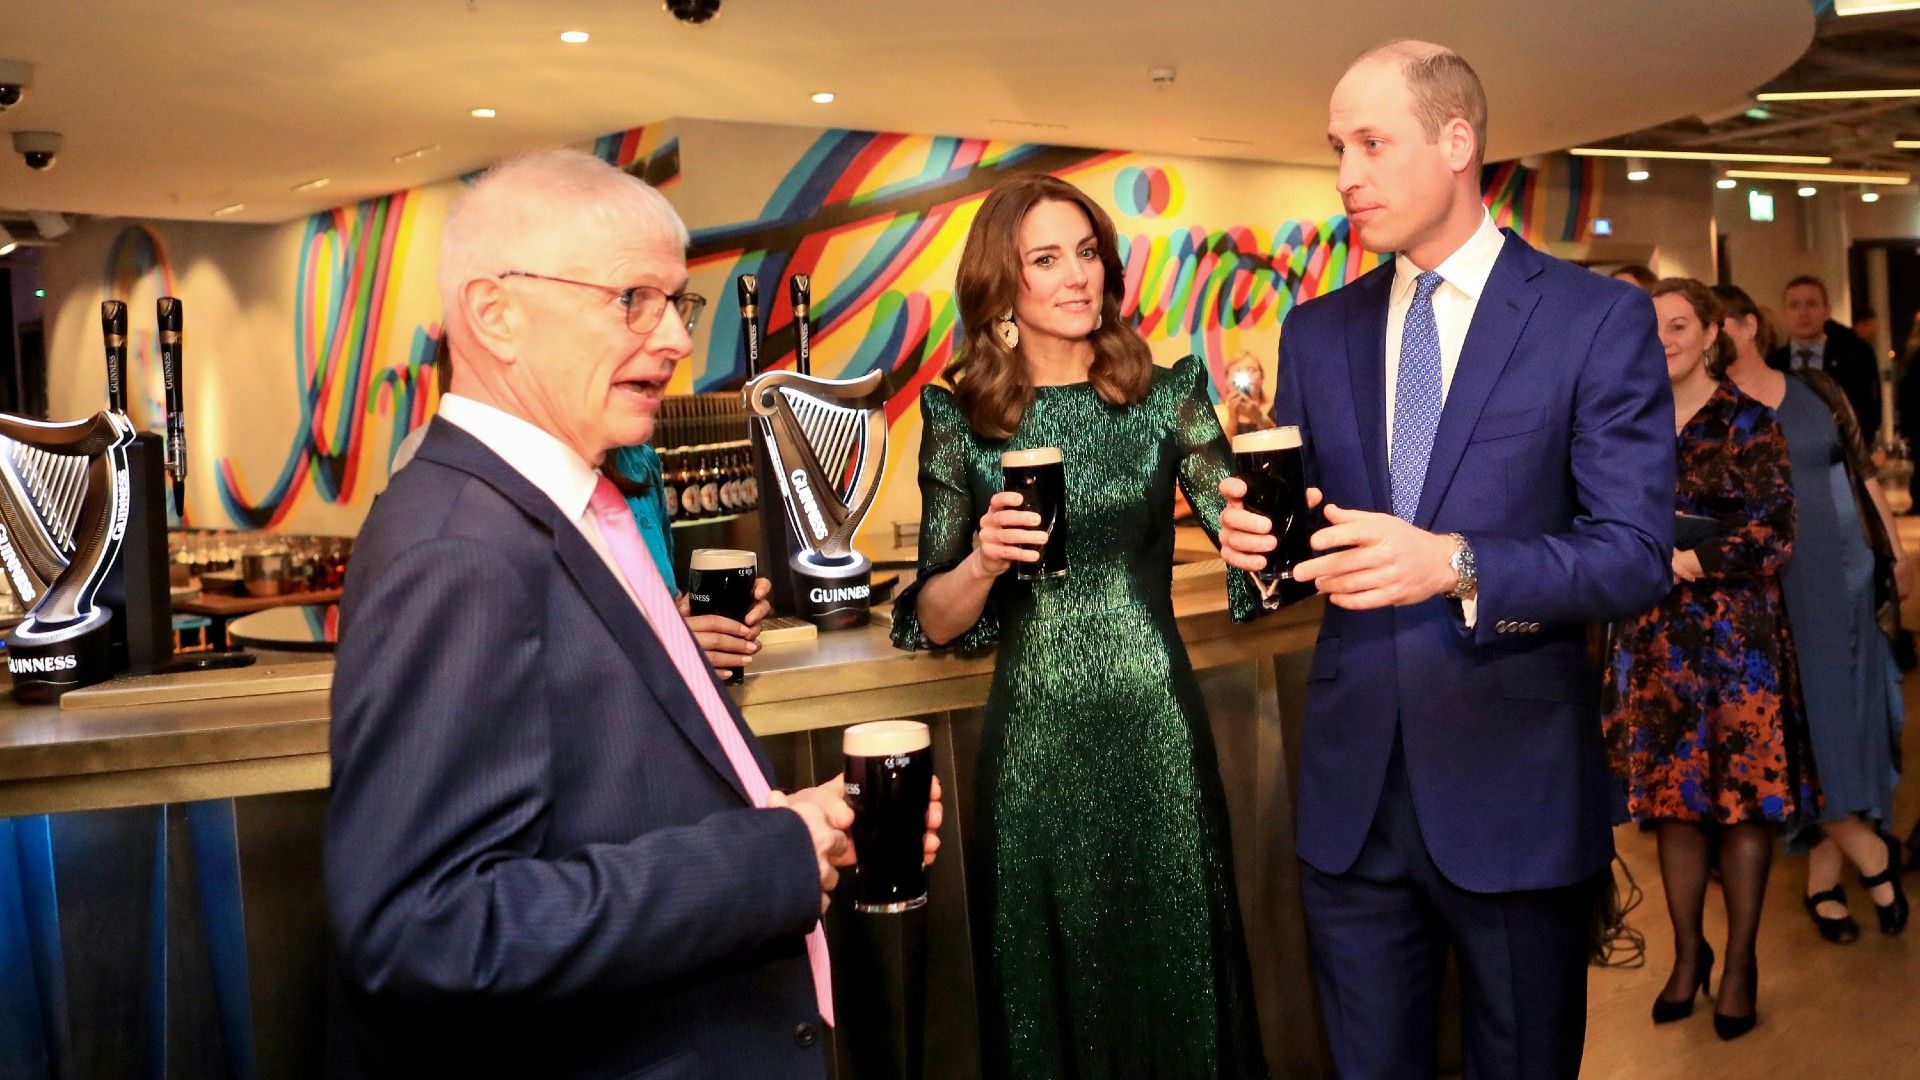 <p>                     Prince William and Kate Middleton's trip in 2020 was their first official trip to Ireland - but that wasn't the only significant element of the tour.                   </p>                                      <p>                     It was also the first time any member of the royal family had visited following the Brexit vote, leaving some political tensions between the United Kingdom and Ireland.                   </p>                                      <p>                     During their three-day trip, the couple spent time in Dublin, County Meath, County Kildare, and Galway. Winning favour, both royals wasted no time toasting the Irish officials with a pint of Guinness.                   </p>